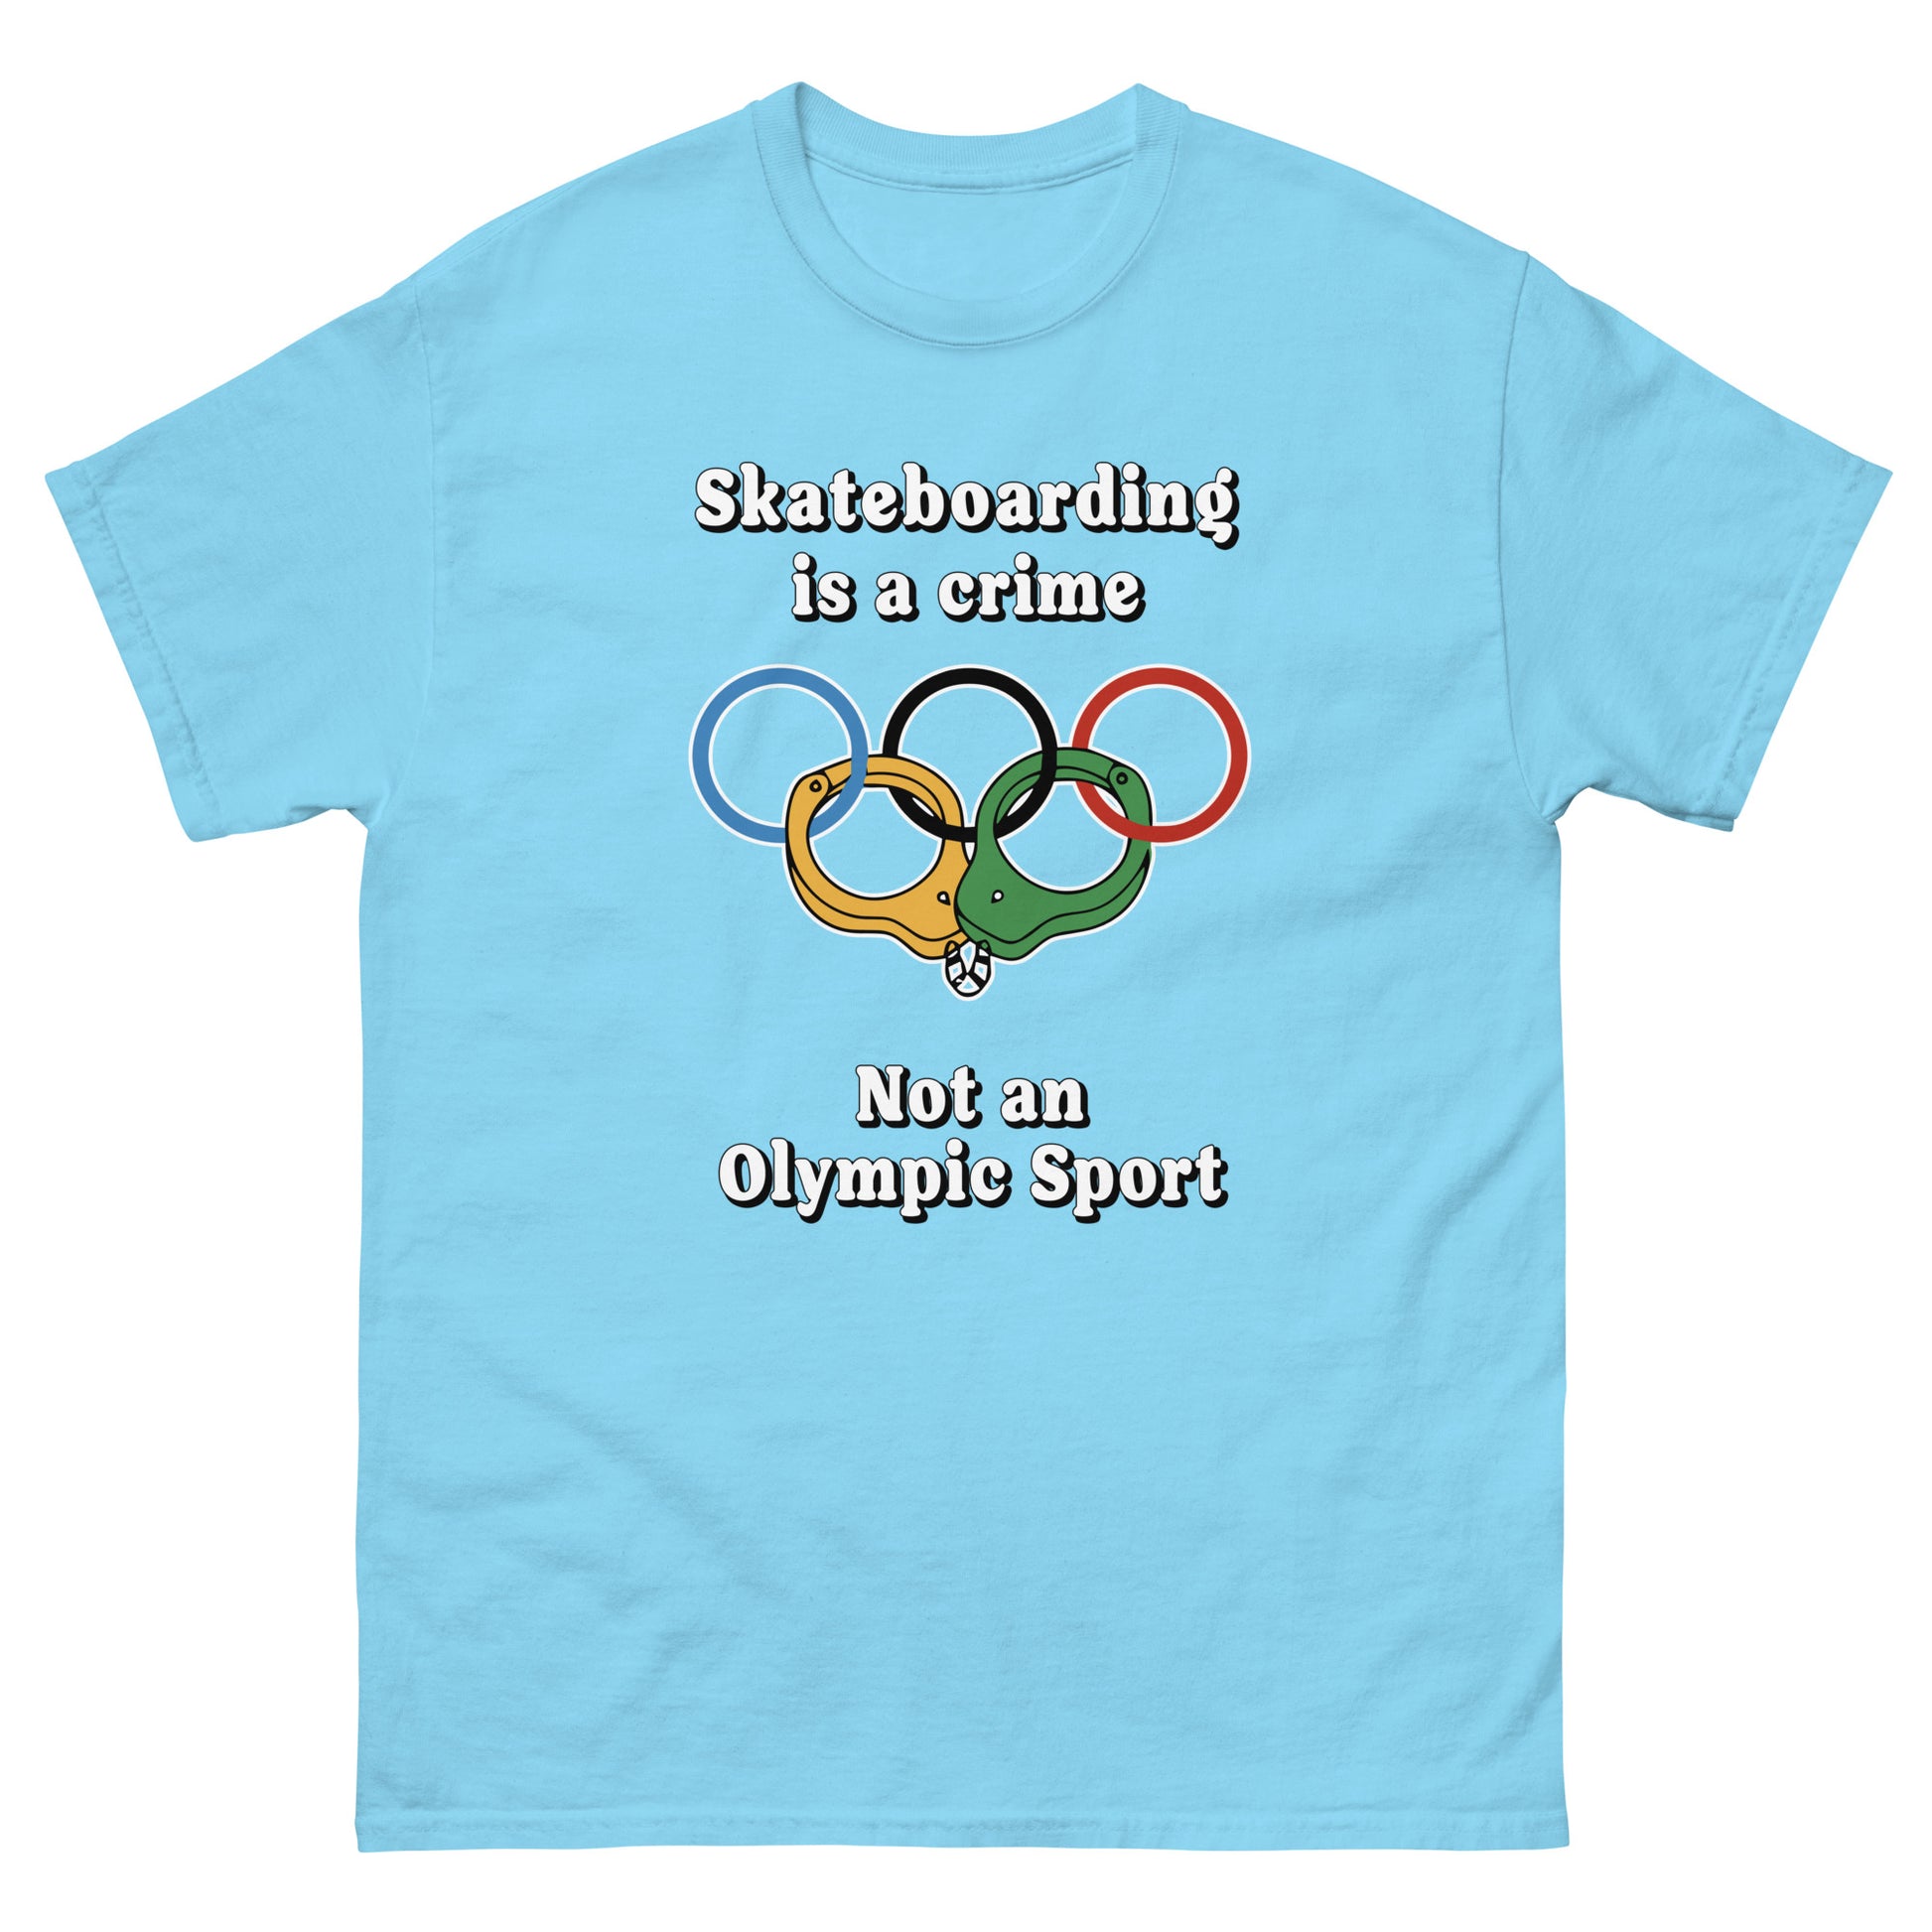 Skateboarding is a crime not an olympic sport design printed on a t-shirt by Whistler Shirts